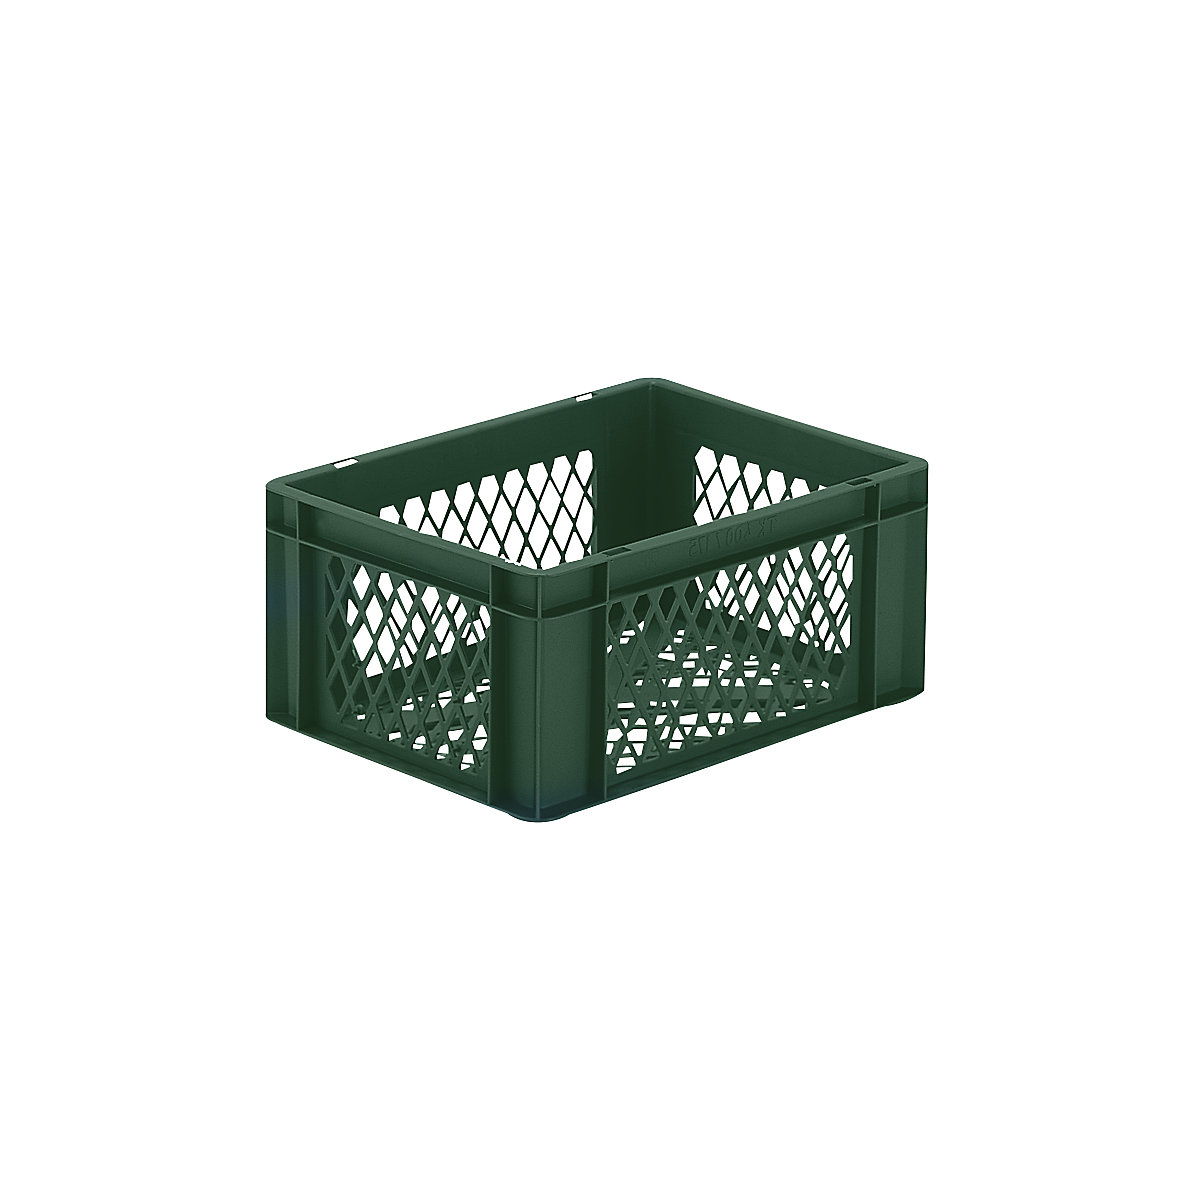 Euro stacking container, perforated walls and base, LxWxH 400 x 300 x 175 mm, green, pack of 5-6